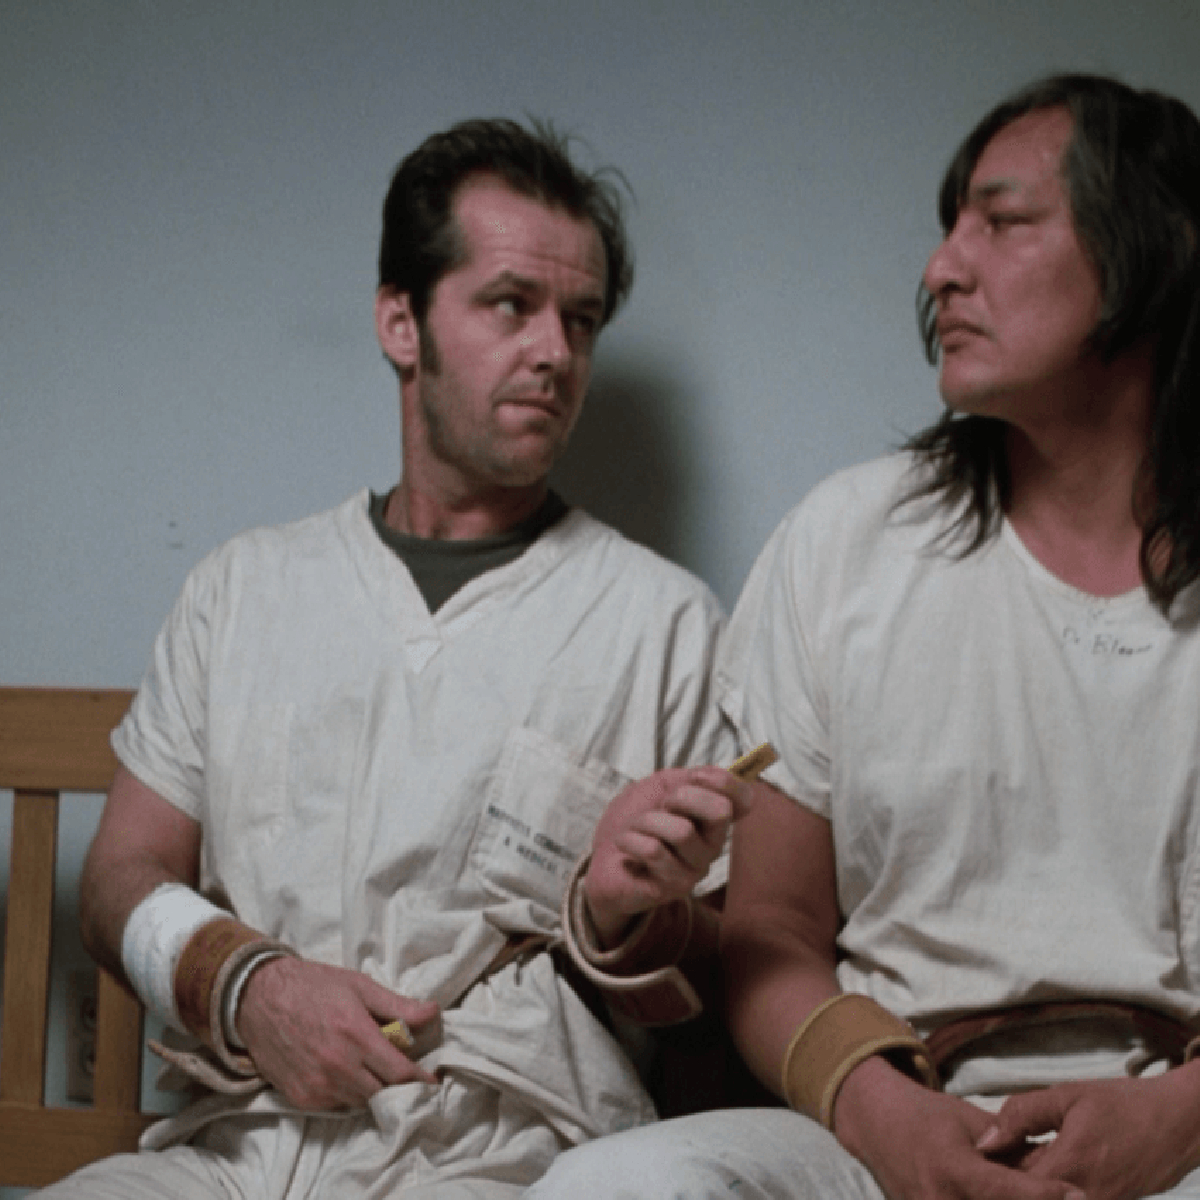 A still from One Flew Over the Cuckoo's Nest.